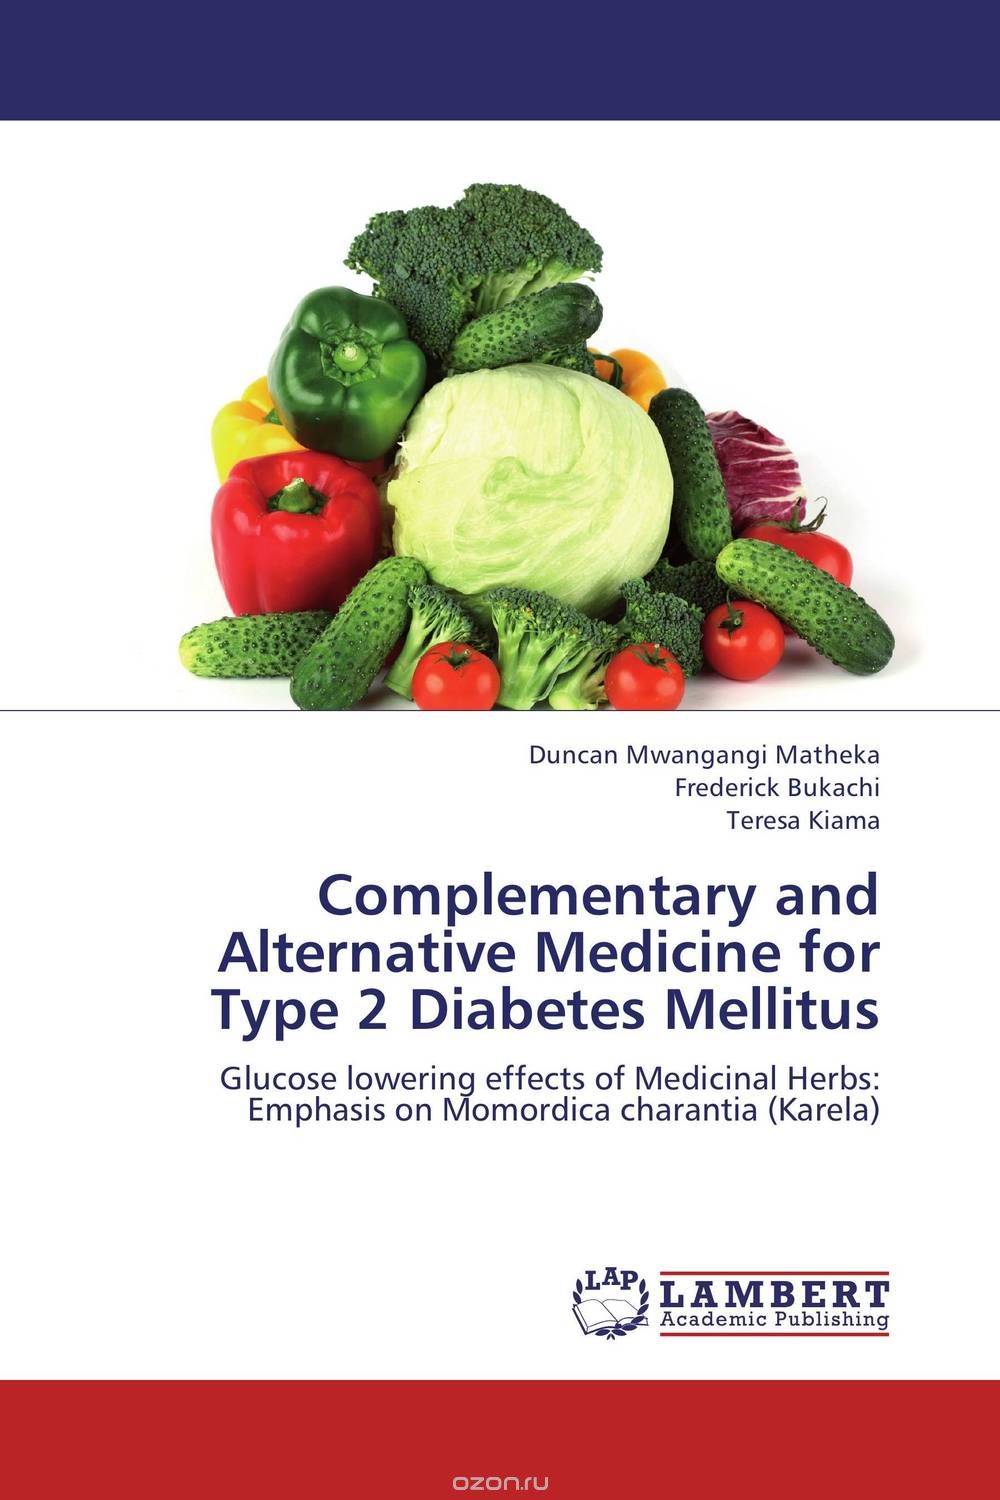 Complementary and Alternative Medicine for Type 2 Diabetes Mellitus